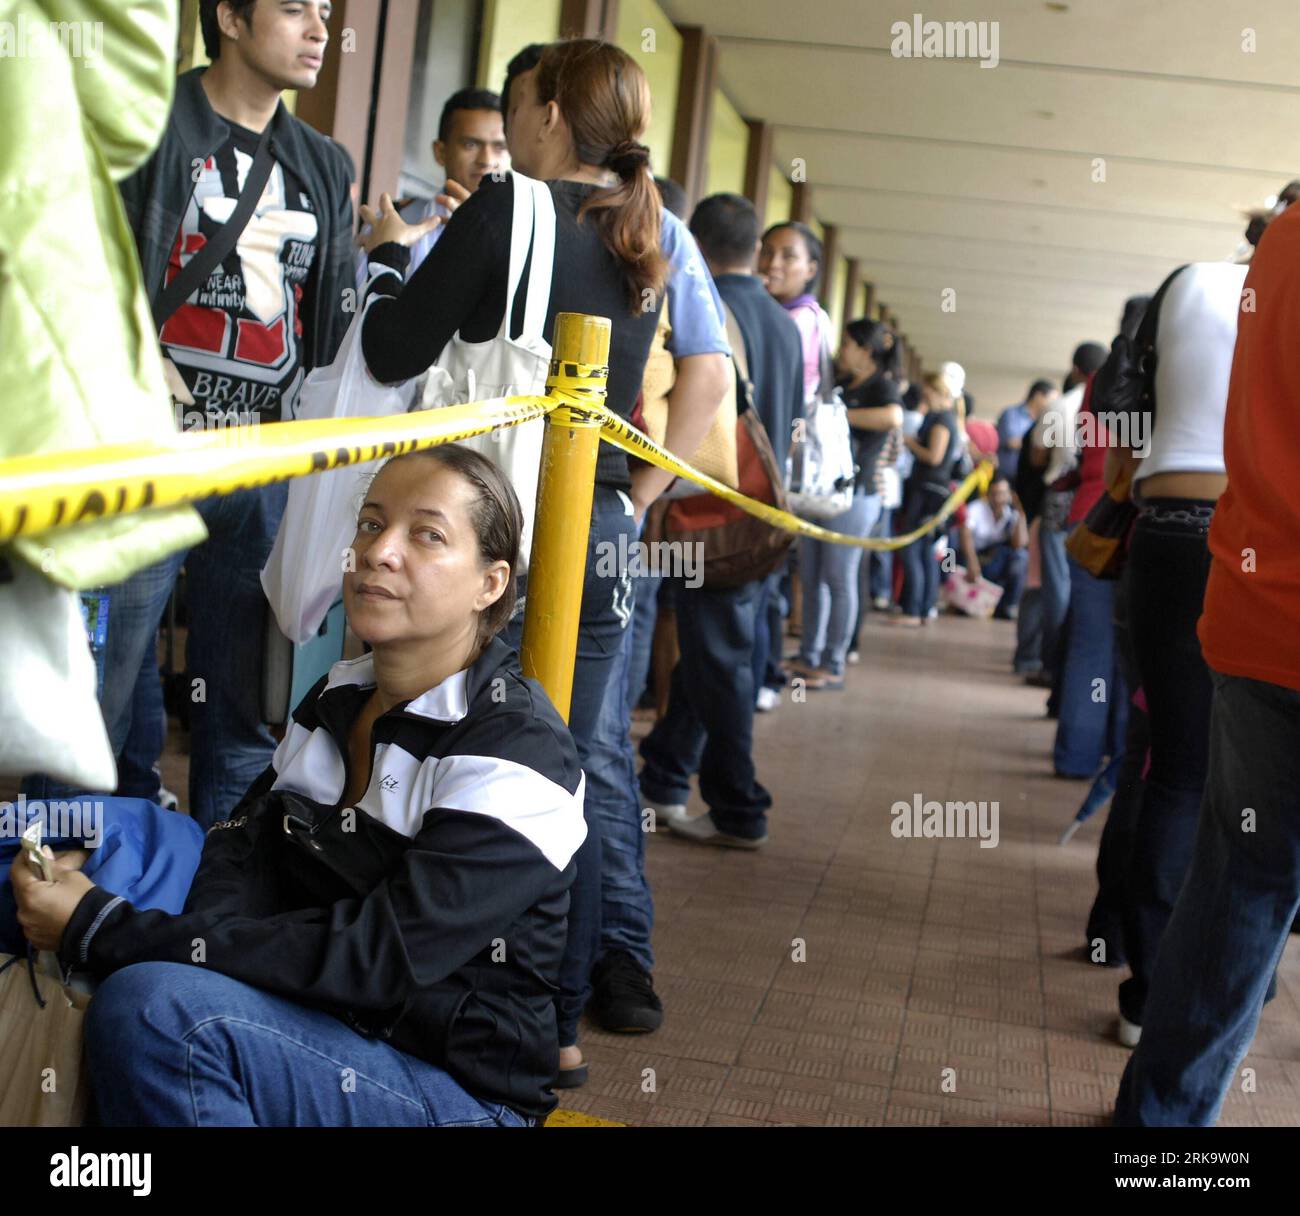 Bildnummer: 54233740  Datum: 17.07.2010  Copyright: imago/Xinhua (100717) -- PANAMA CITY, July 17, 2010 (Xinhua) -- Illegal immigrants wait to get legal ID at the Atlapa exhibition and convention center in Panama City, July 17, 2010. About 20,000 undocumented foreigners living in Panama will be granted legal right to stay, an official of National Service of Migration (SNM) said on Thursday. (Xinhua) (zx) (2)PANAMA-ILLEGAL IMMIGRANTS-LEGAL ID PUBLICATIONxNOTxINxCHN Gesellschaft Immigranten Einwanderung Panama premiumd xint kbdig xsp 2010 quadrat o00 Warteschlange    Bildnummer 54233740 Date 17 Stock Photo